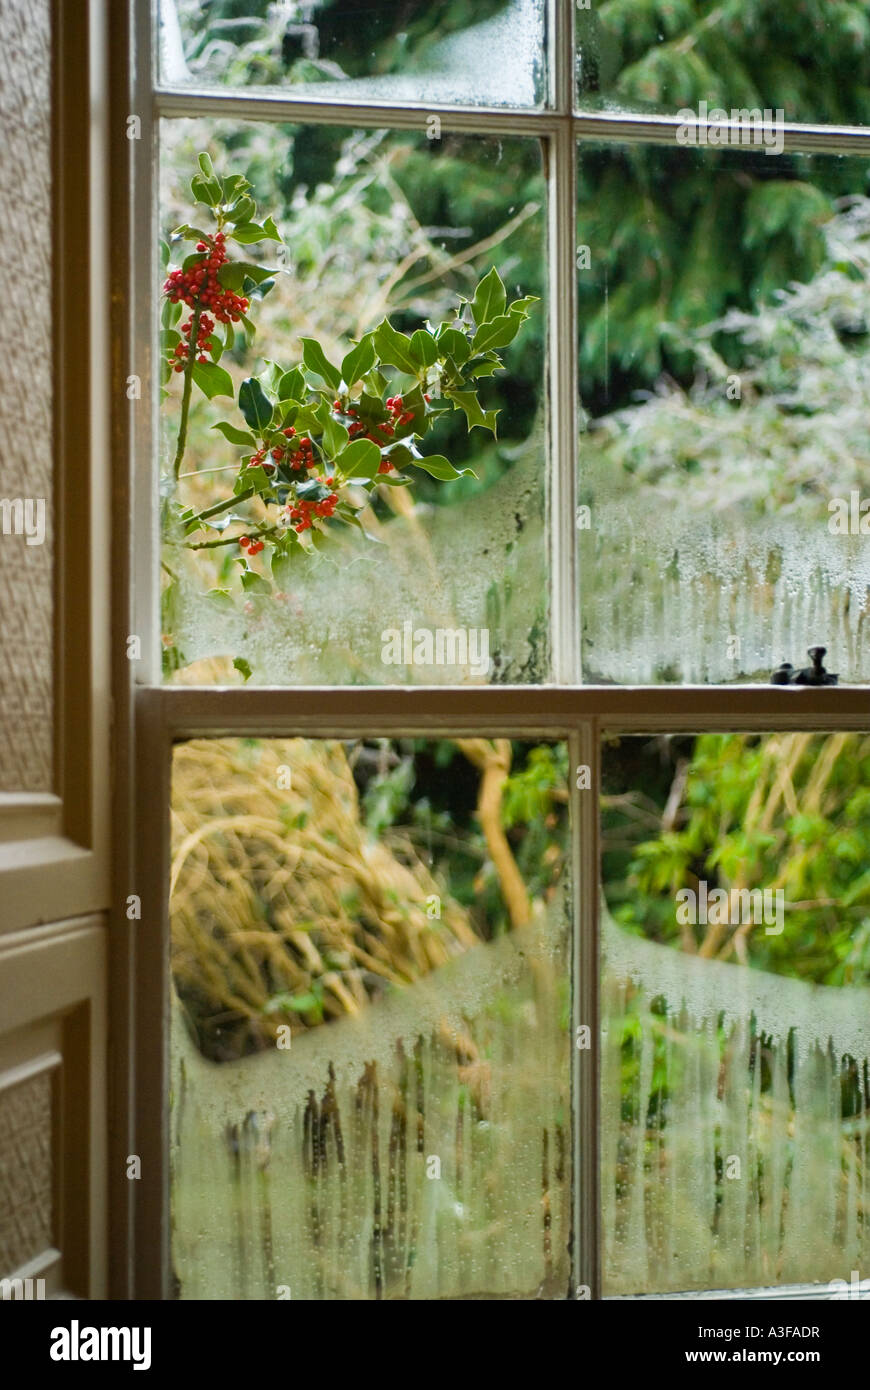 Old single glazed sash window on Christmas day with holly outside and veils of condensation on the glass from melted frost Stock Photo